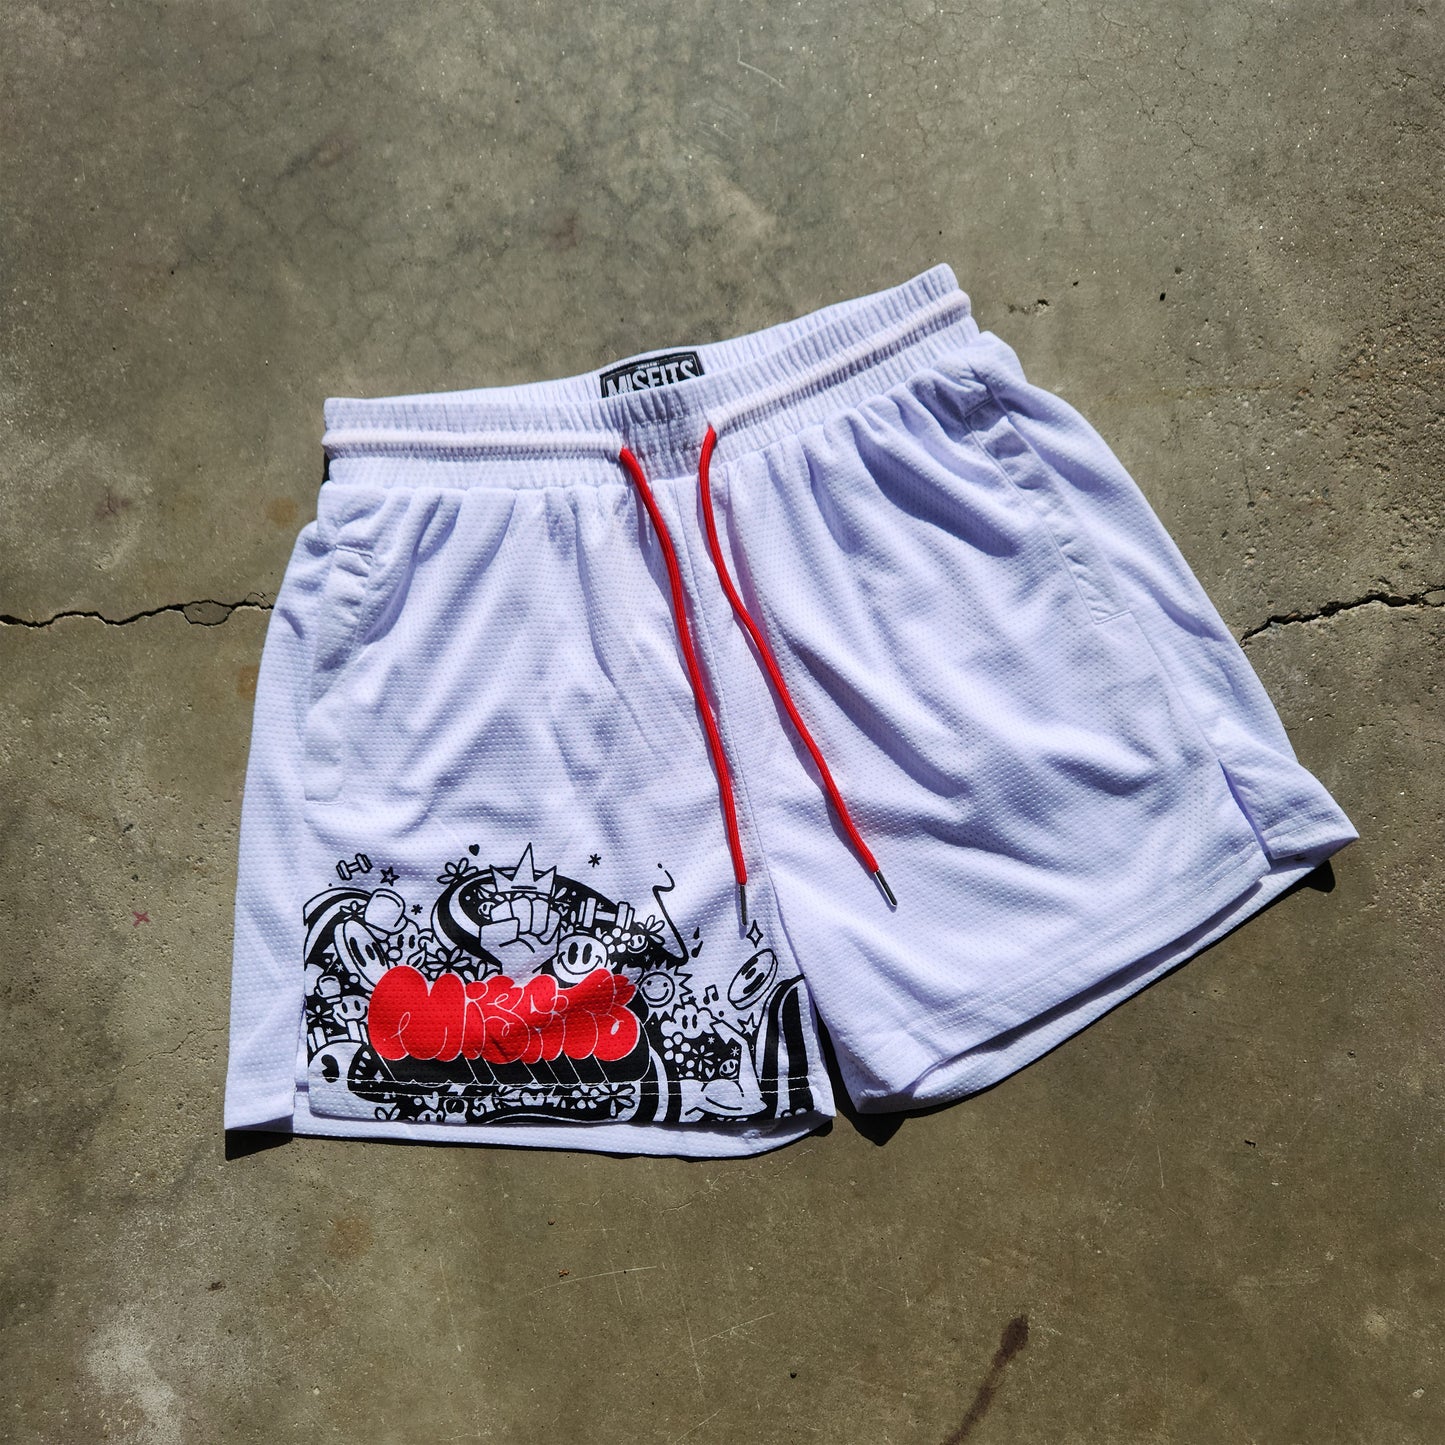 "MISFITS" LIFTING SHORTS [4" INSEAM] - WHITE/RED